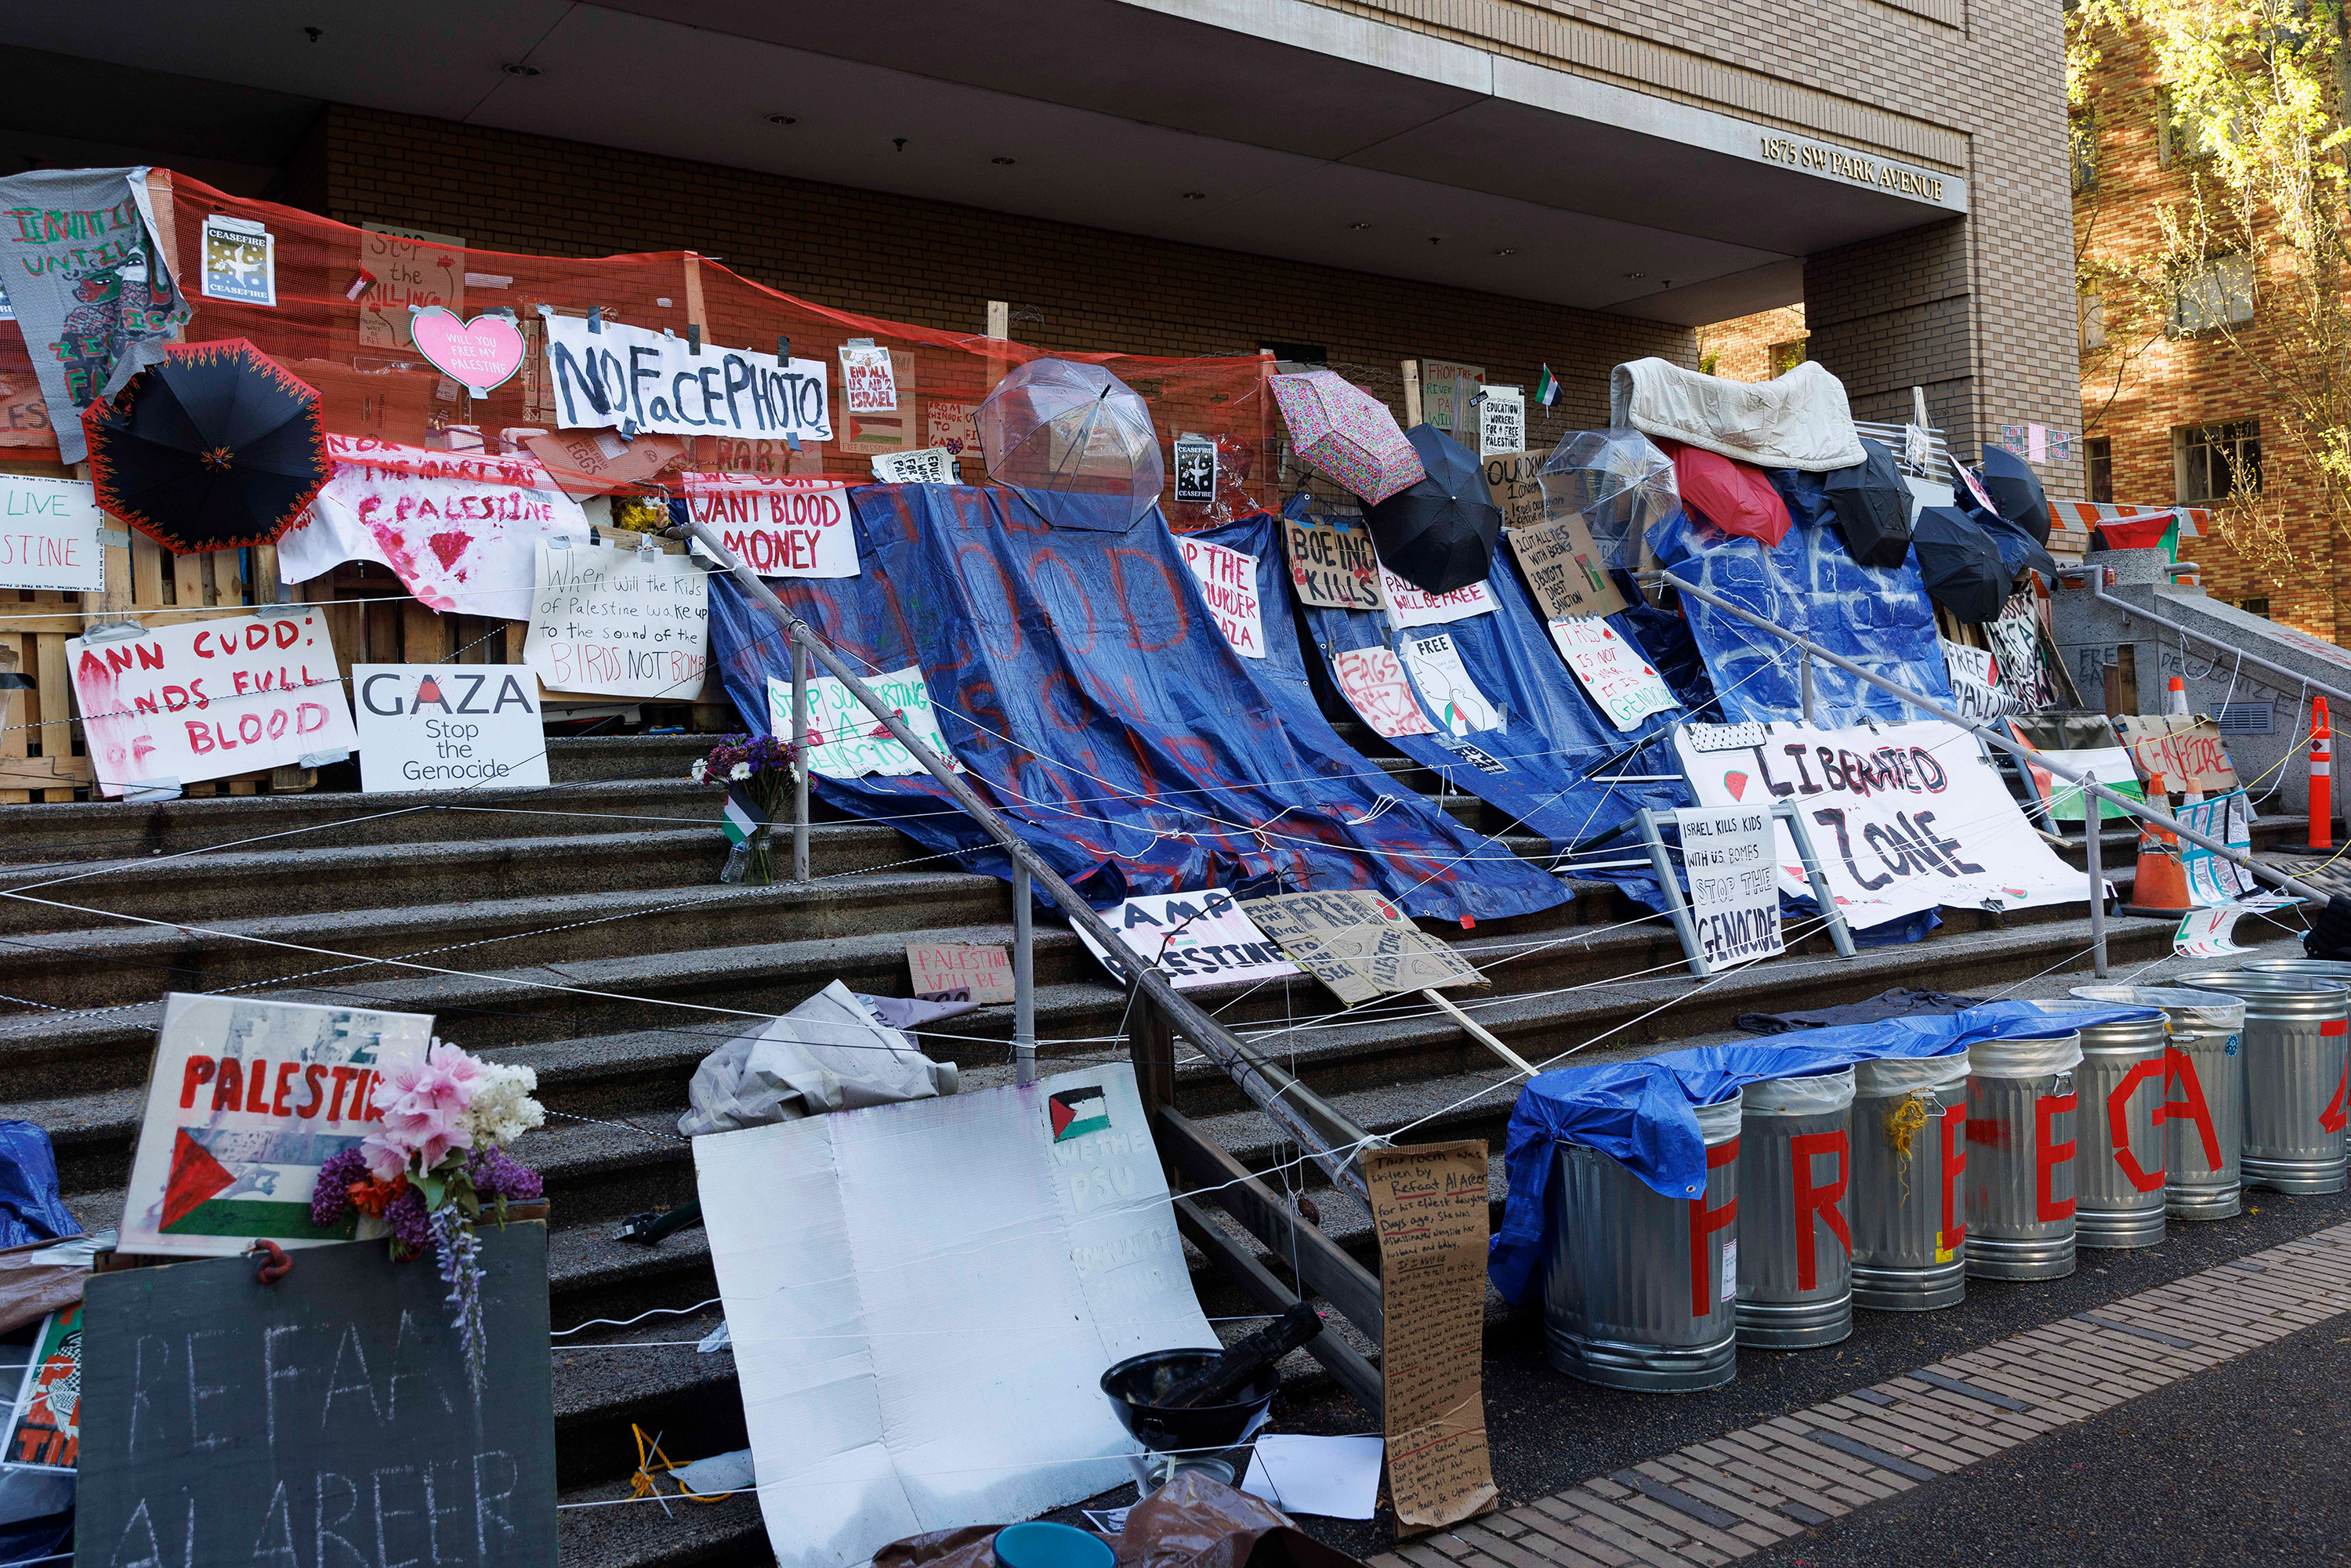 The blockade at the entrance to the library at Portland State University in Portland, Oregon, is seen on Monday.